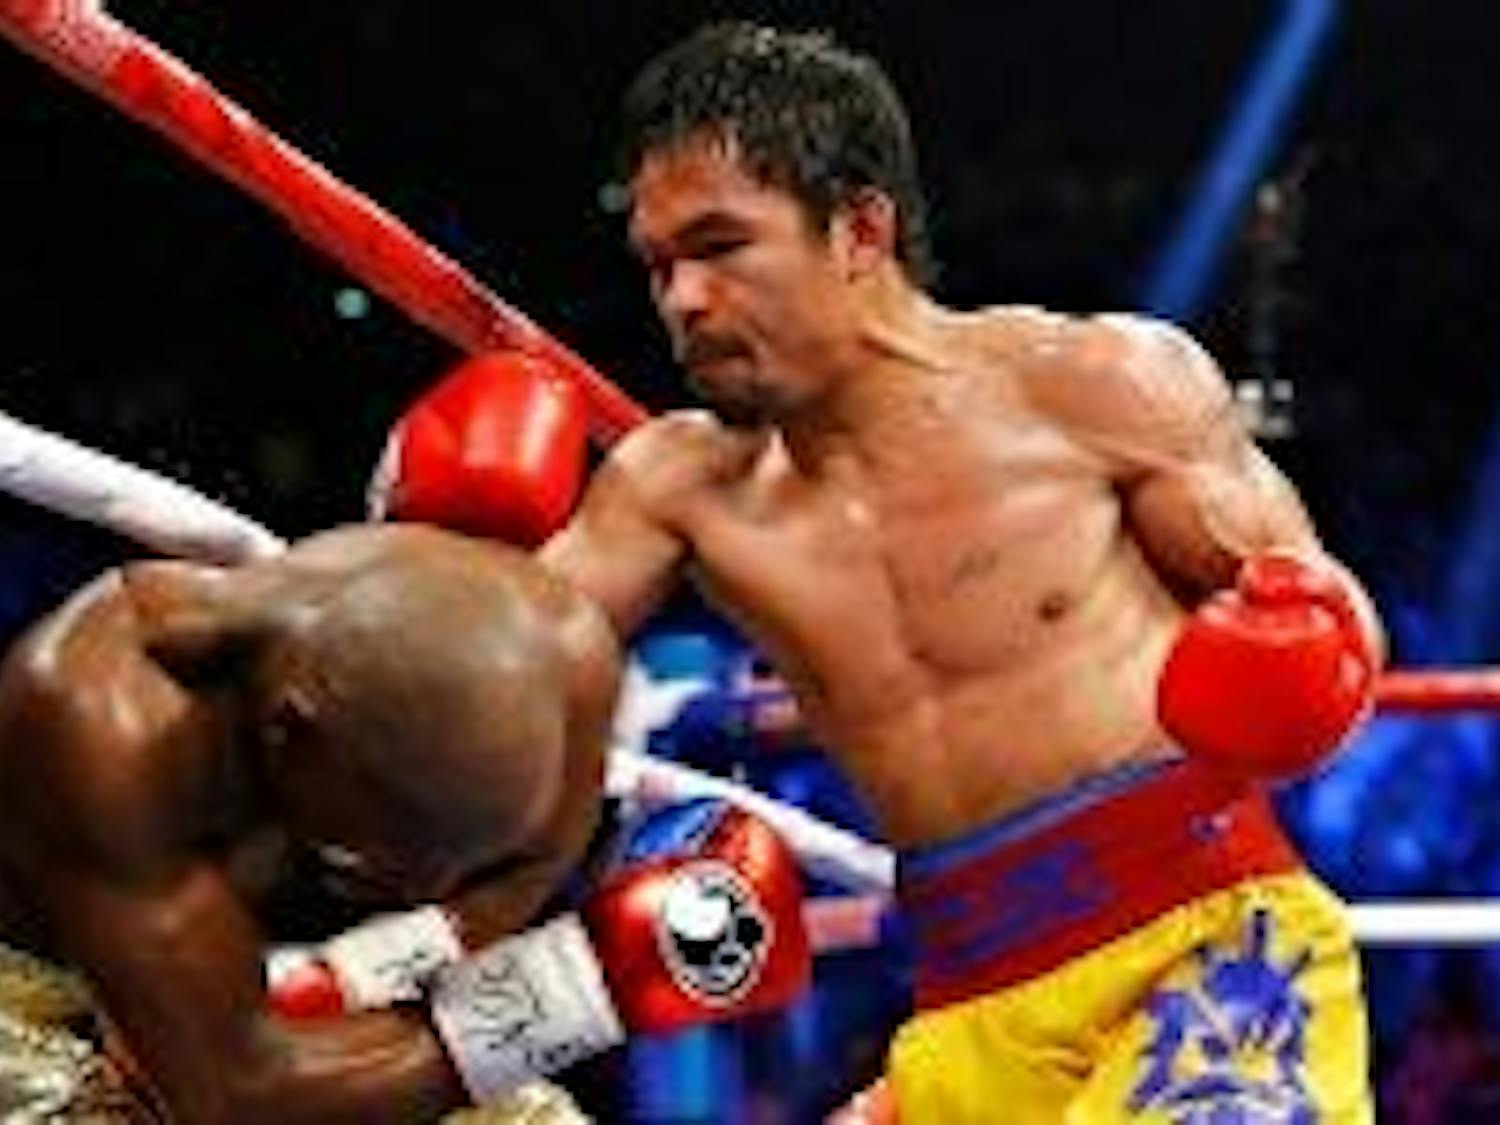 With Manny Pacquiao set to have shoulder surgery, speculation has risen about a possible rematch in the future.